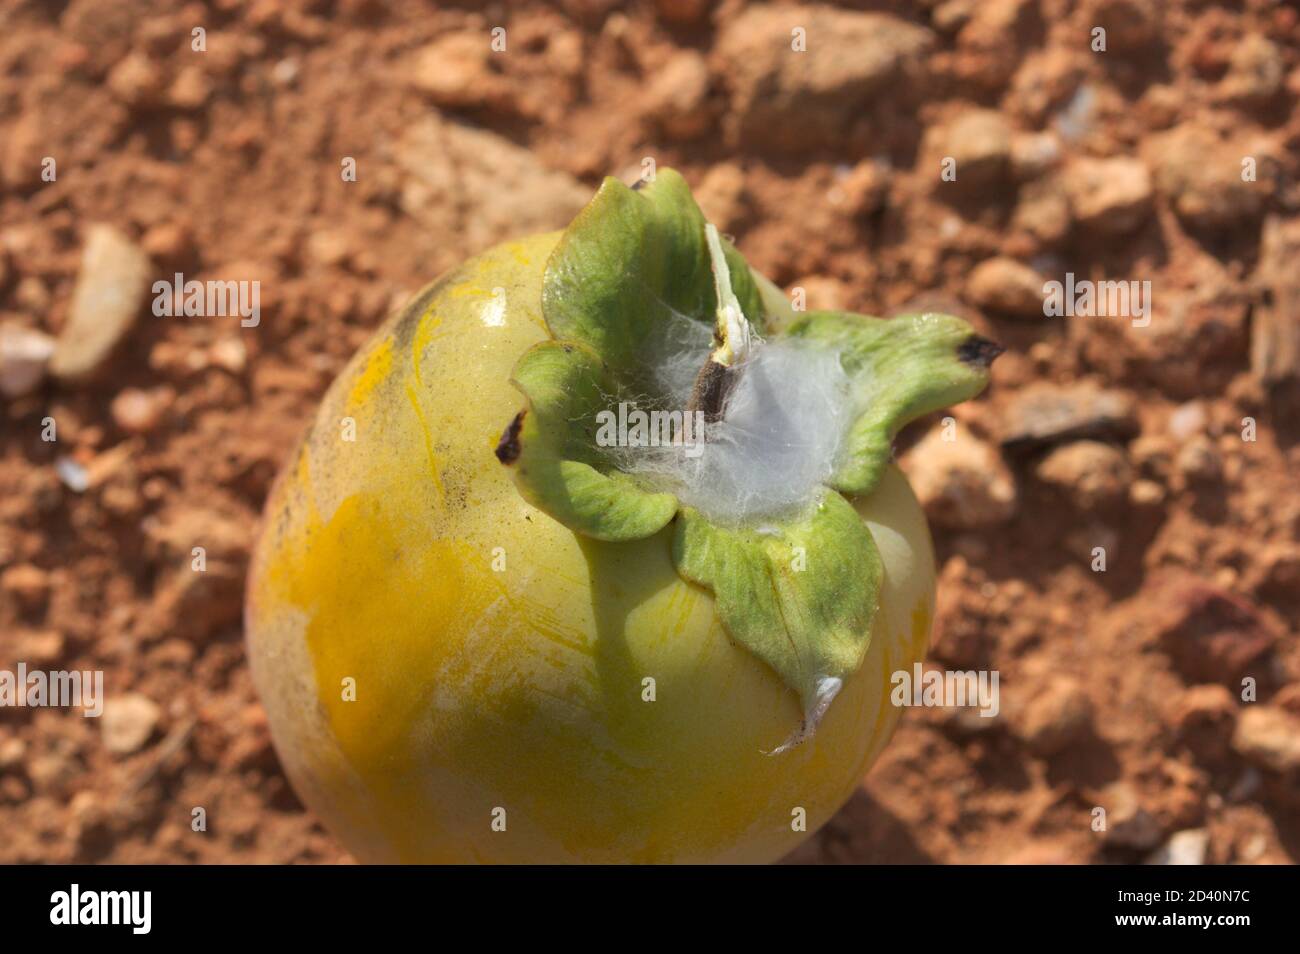 Closeup of a persimmon that is infested by the pest of the mealy bugs or Pseudococcus longispinus Stock Photo